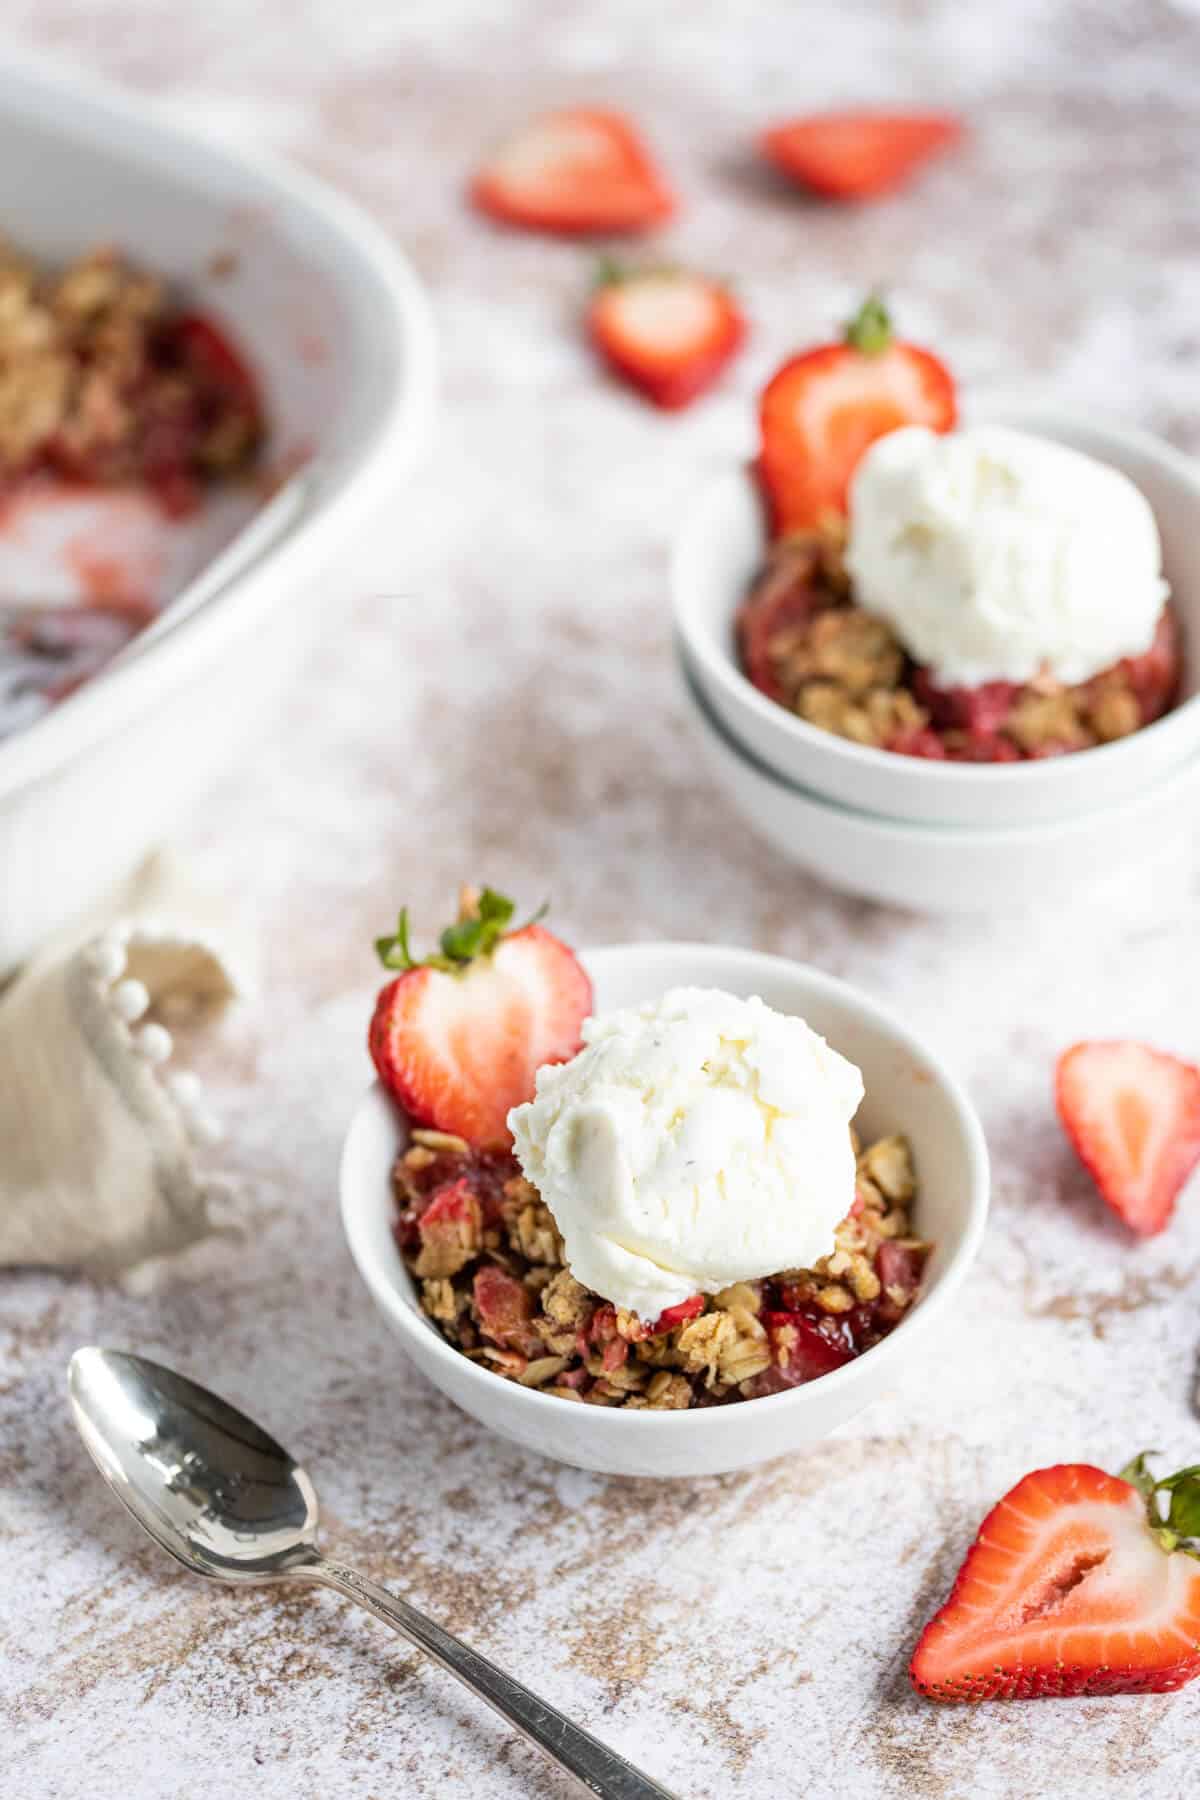 2 bowls of Rhubarb Crisp with strawberries topped with a scoop of ice cream. Each bowl is garnished with a fresh strawberry slice. A spoon is alongside one of the bowls.